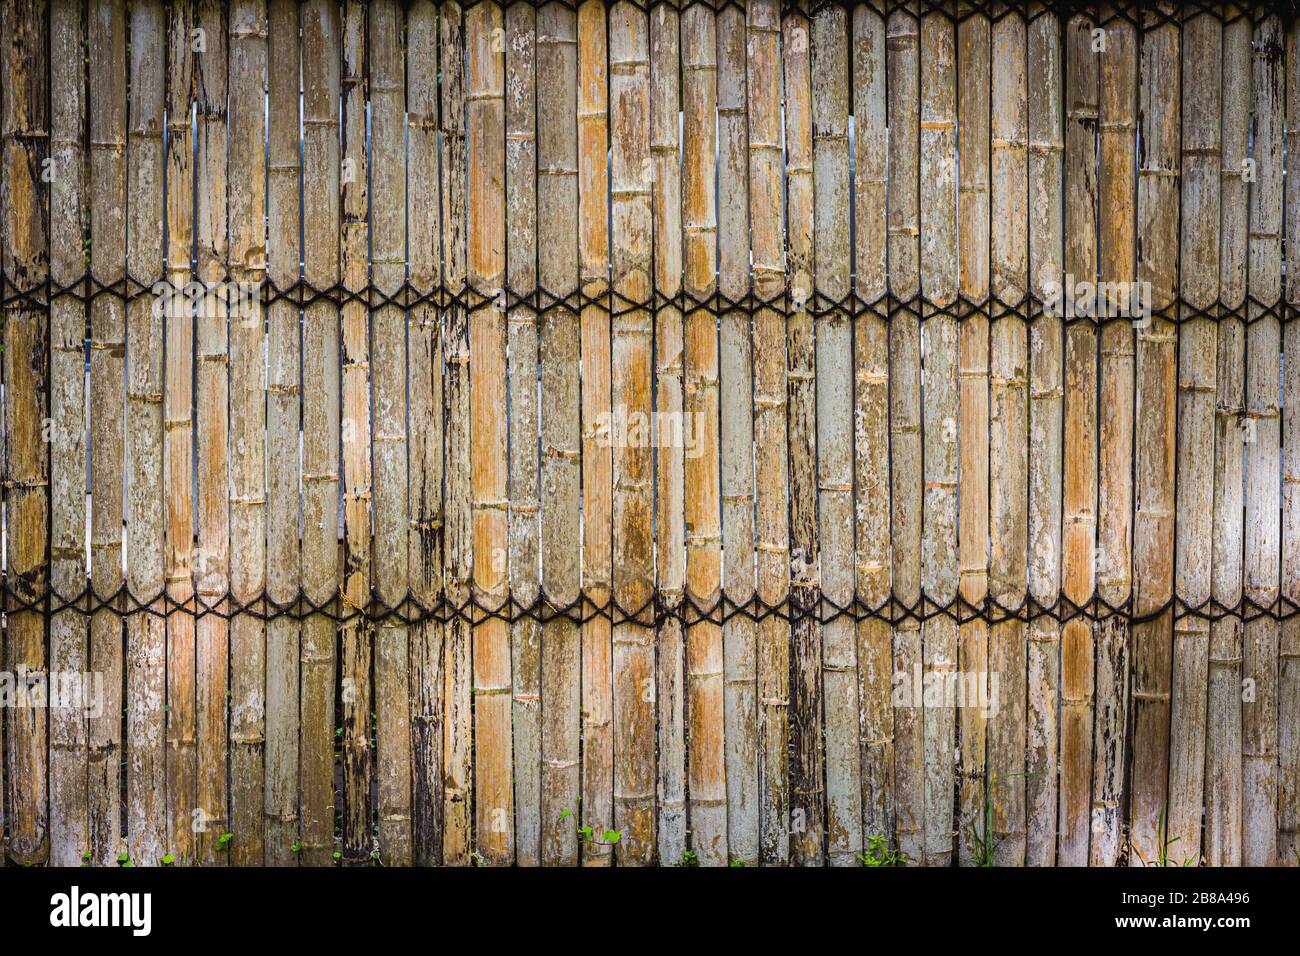 Bamboo wall texture background with The rope is tied together in a row. Stock Photo